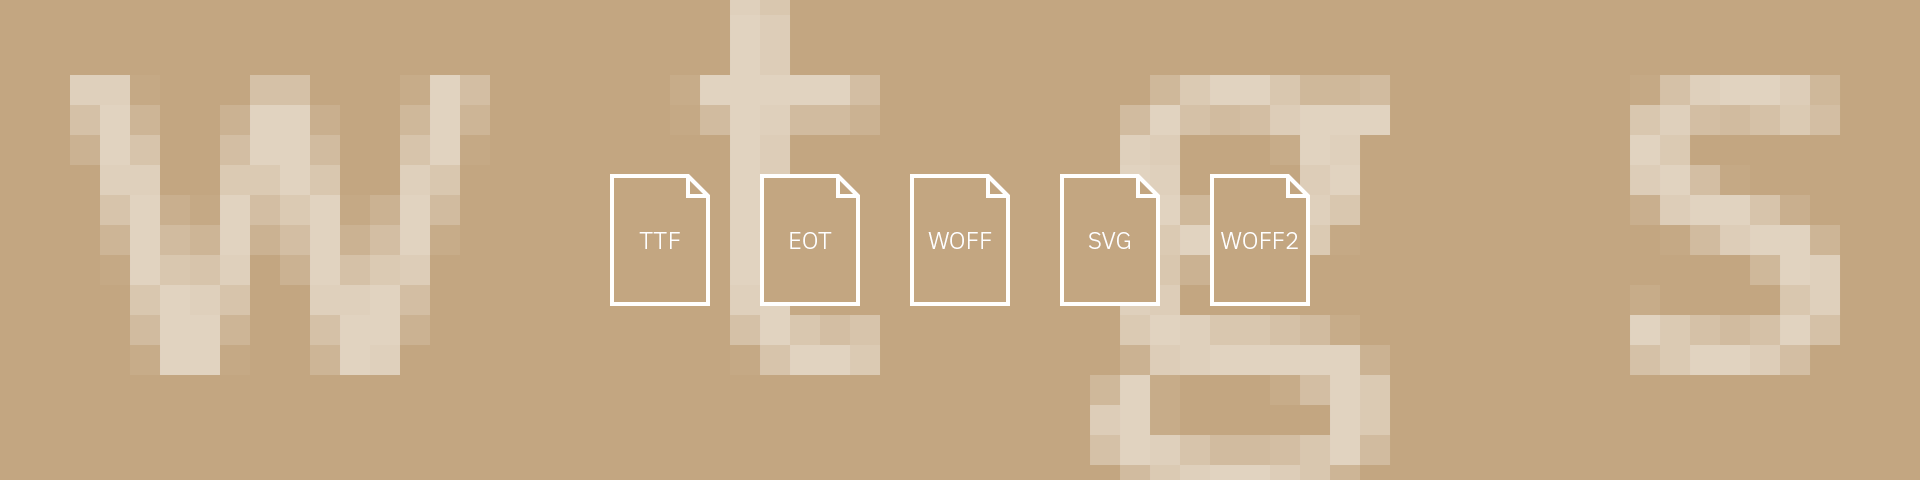 Graphical overview over Webfont formats: TTF, EOT, WOFF, SVG, and WOFF2.